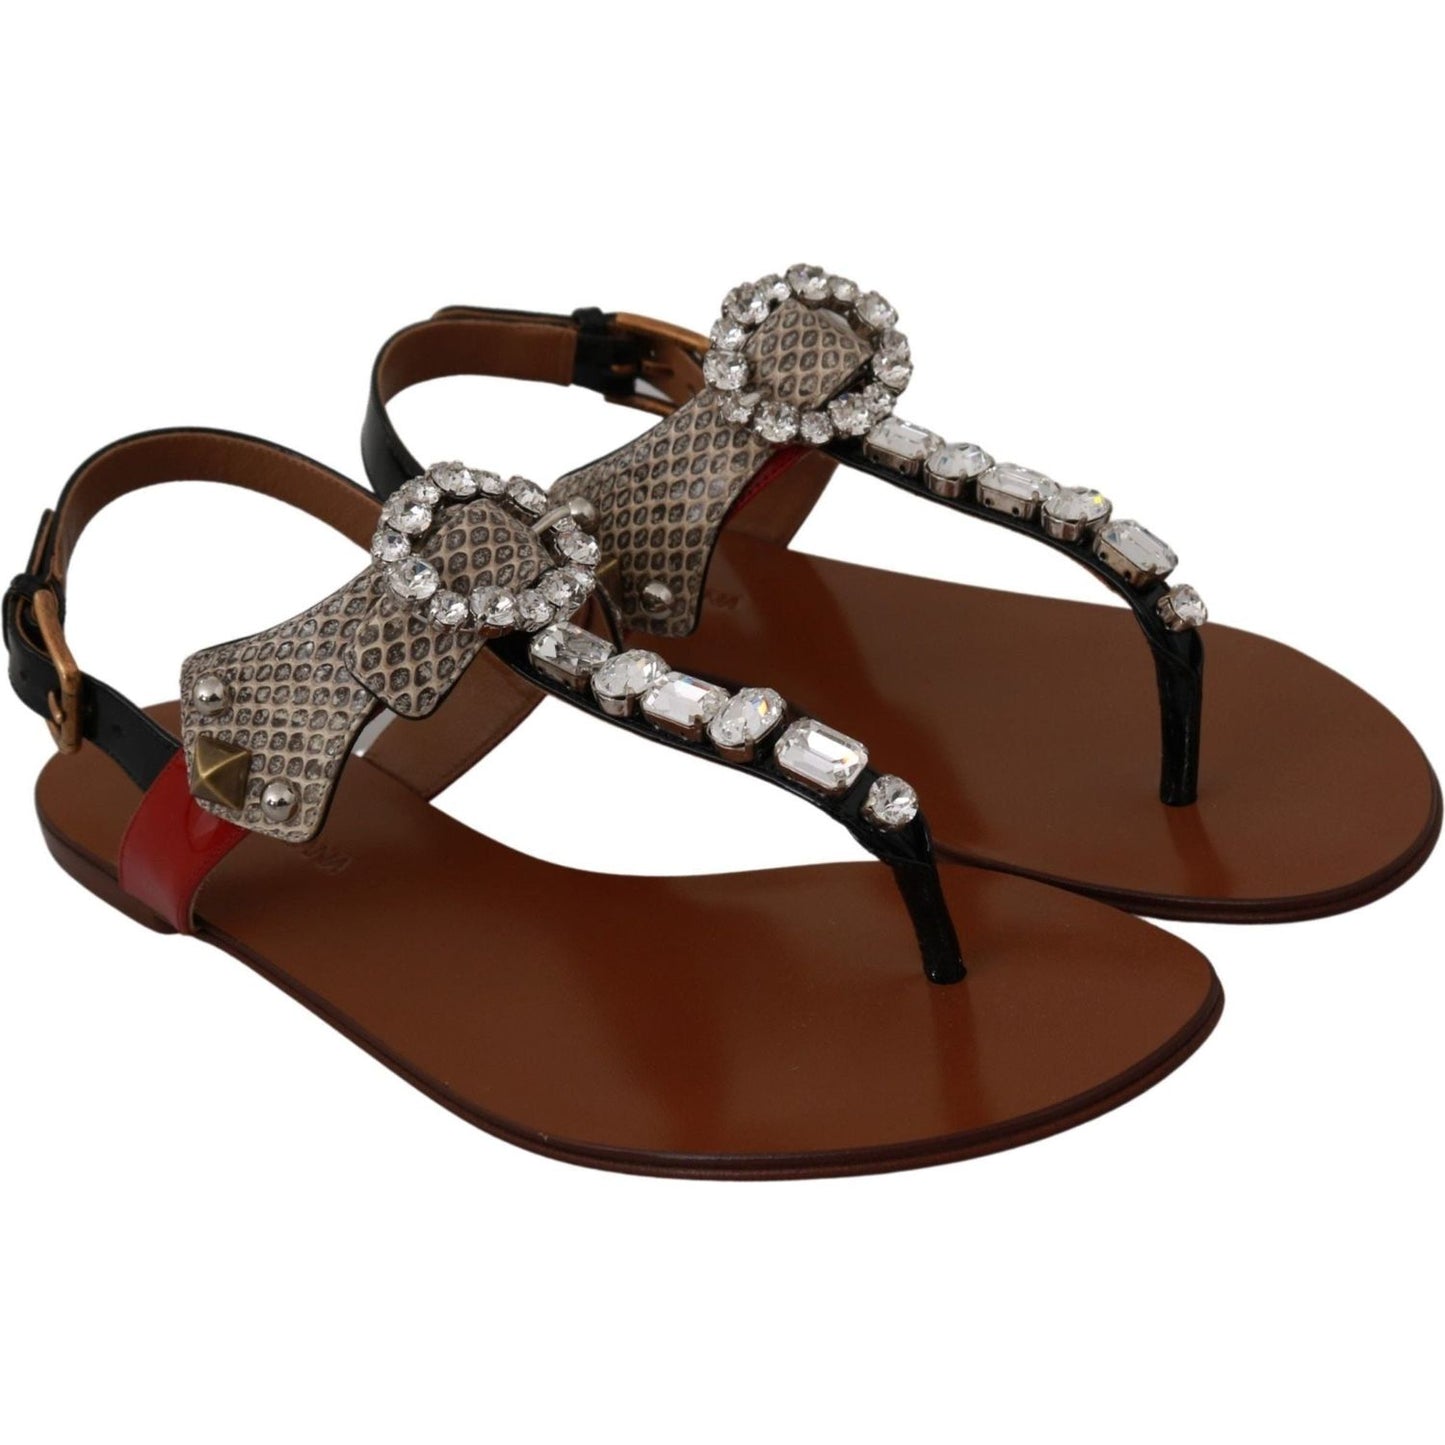 Dolce & Gabbana Elegant Strappy Sandals with Exotic Charm leather-ayers-crystal-sandals-flip-flops-shoes IMG_1605-2aca030c-7df.jpg